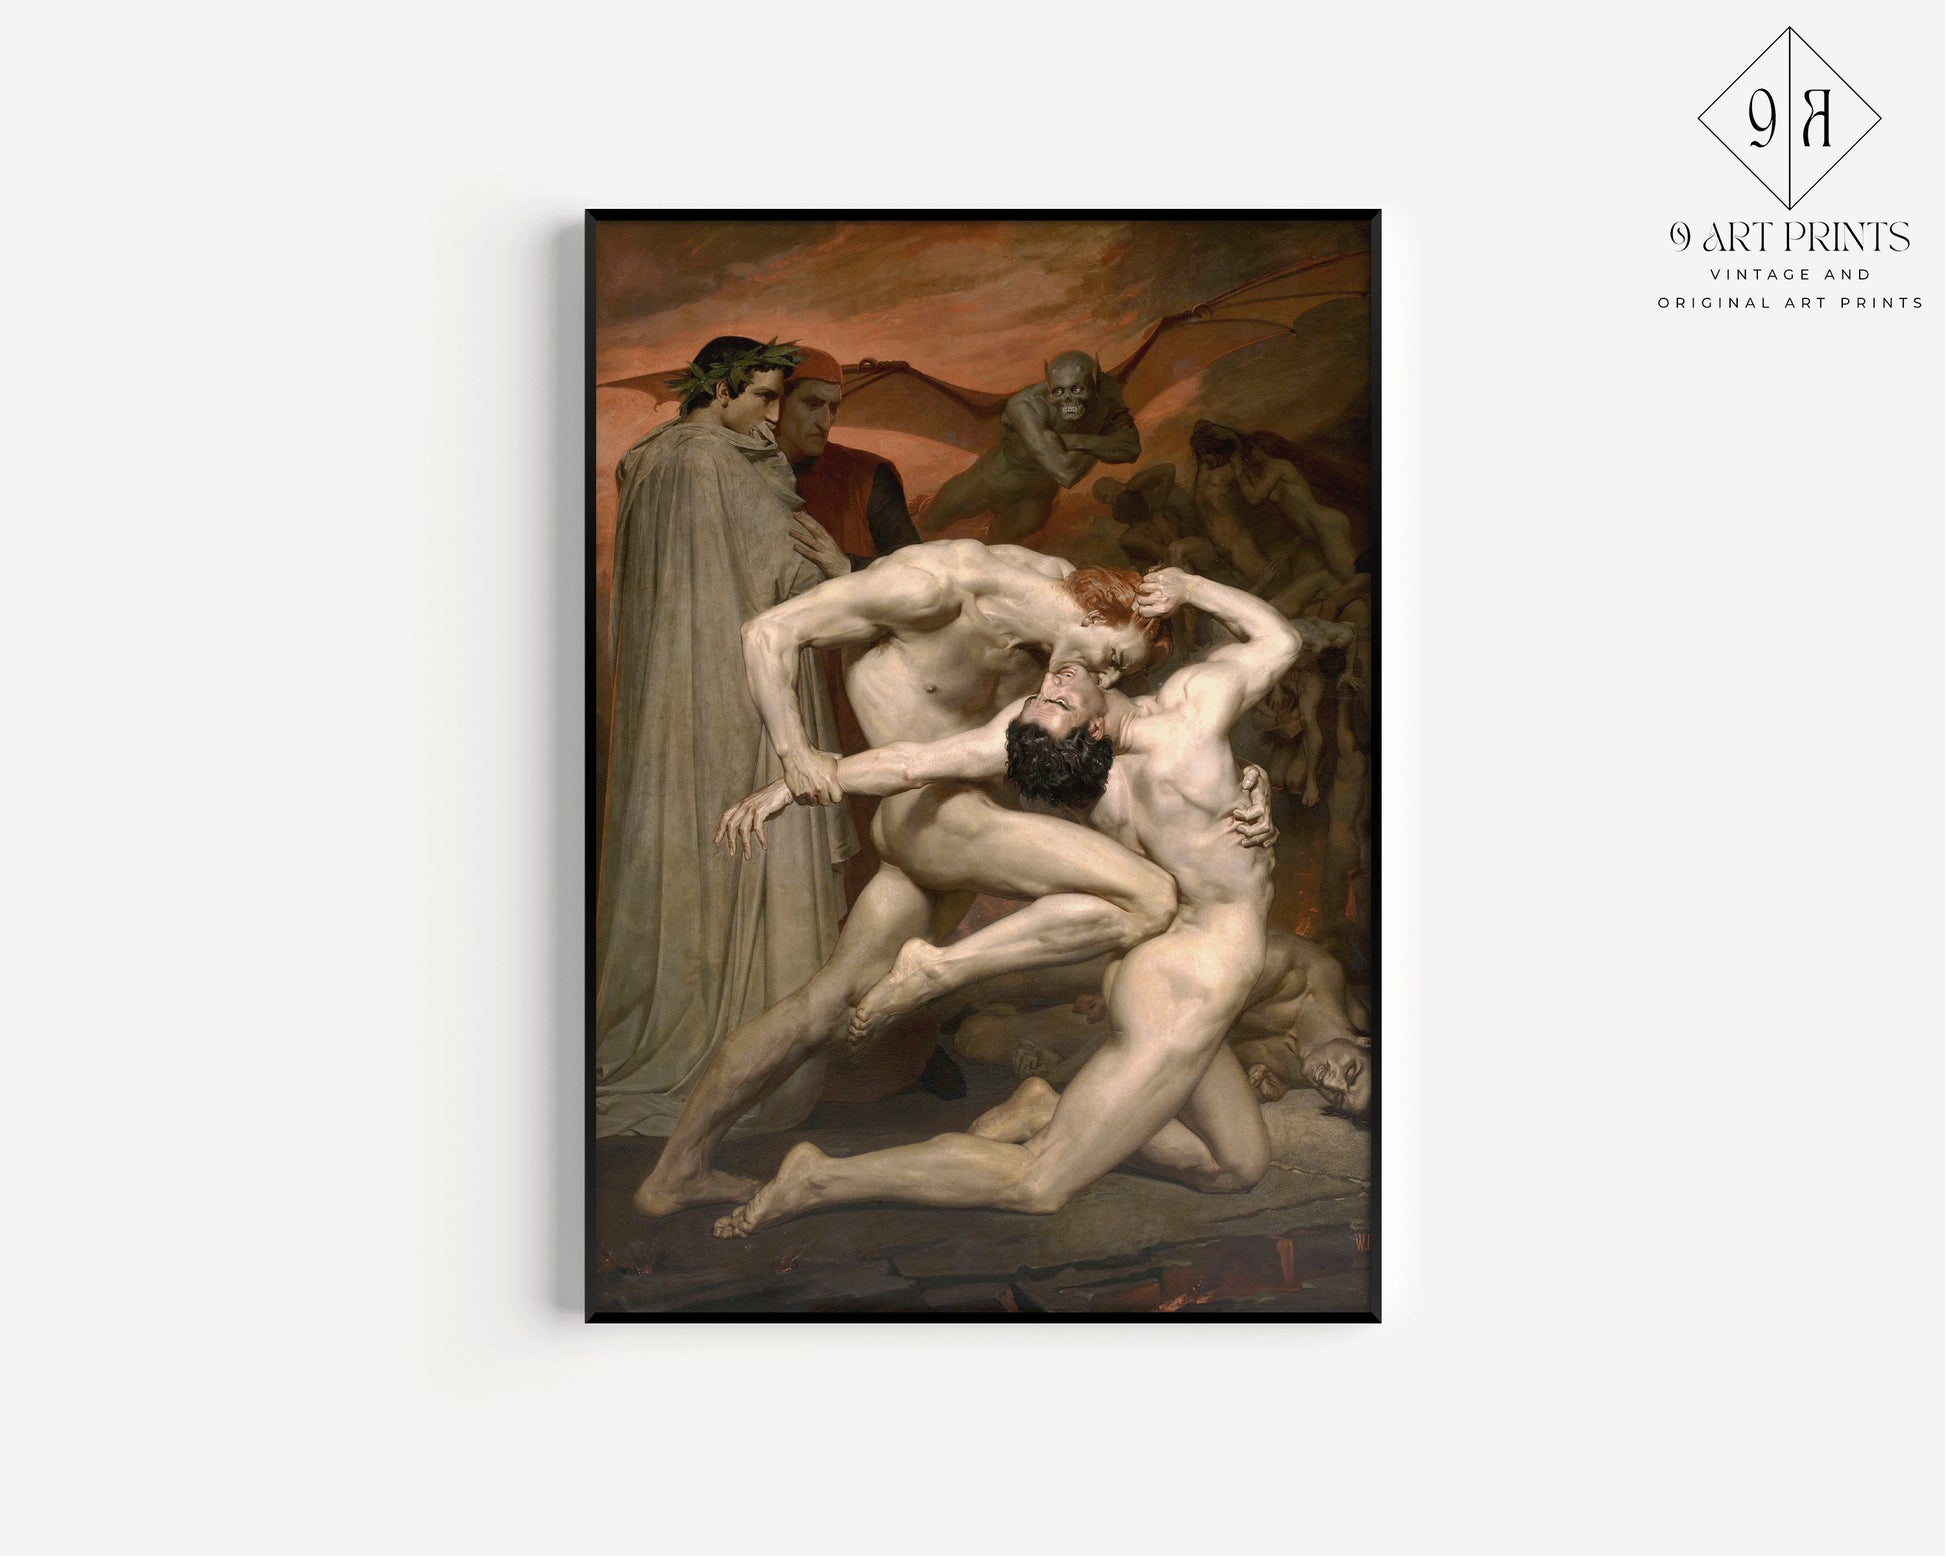 Bouguereau Dante and Vergil Artist Gothic Art Famous Academia Iconic Painting Vintage Ready to hang Framed Home Office Decor Print Gift Idea